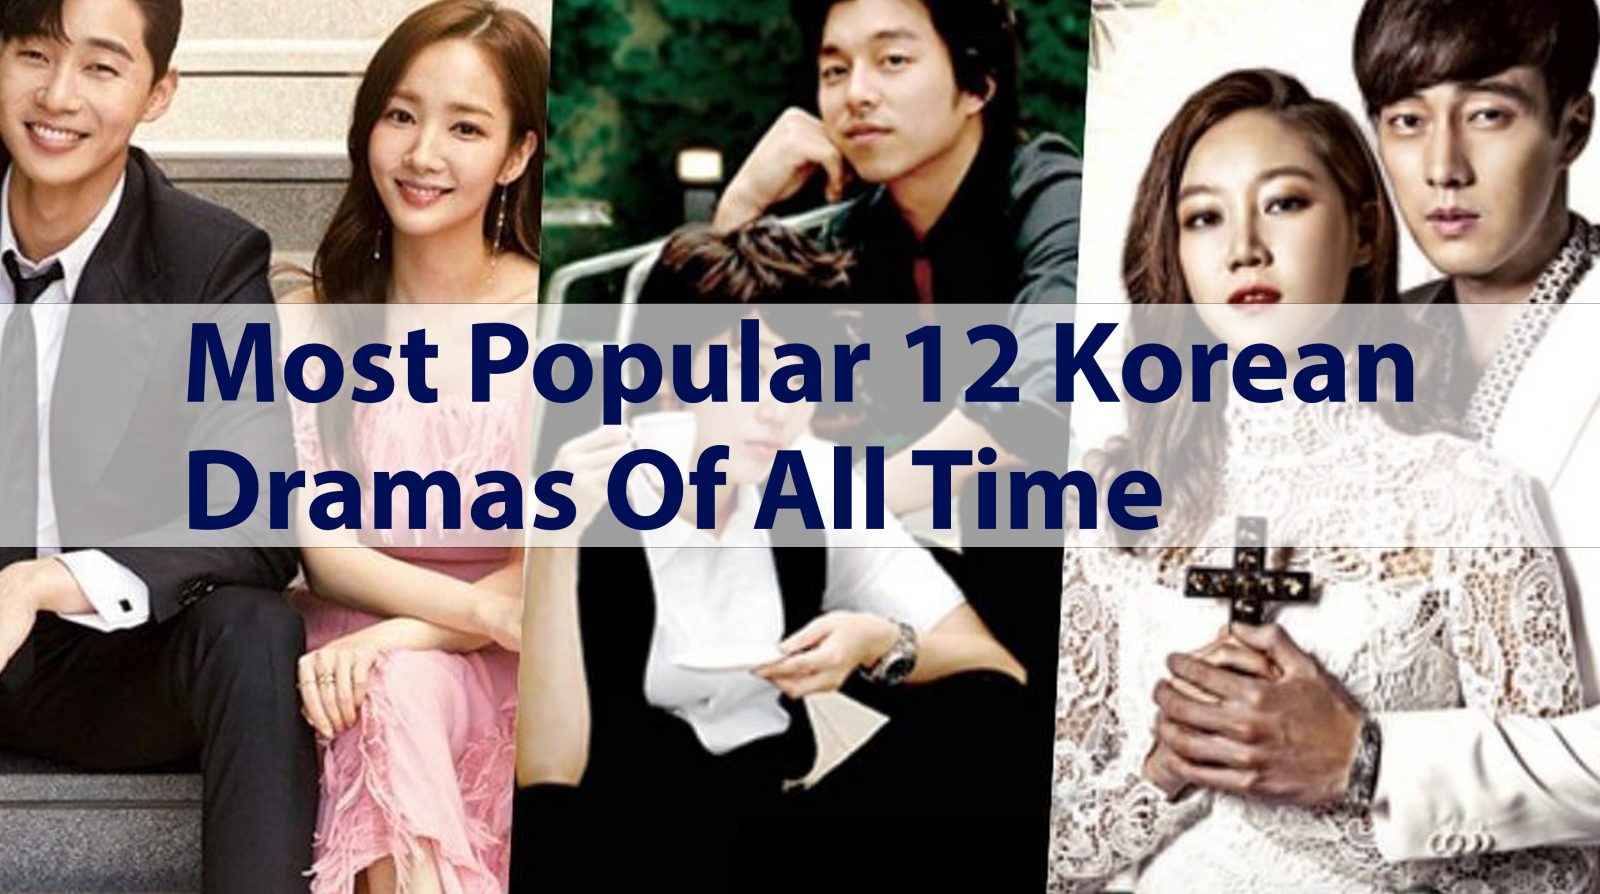 Most Popular 12 Korean Dramas Of All Time You Should Watch